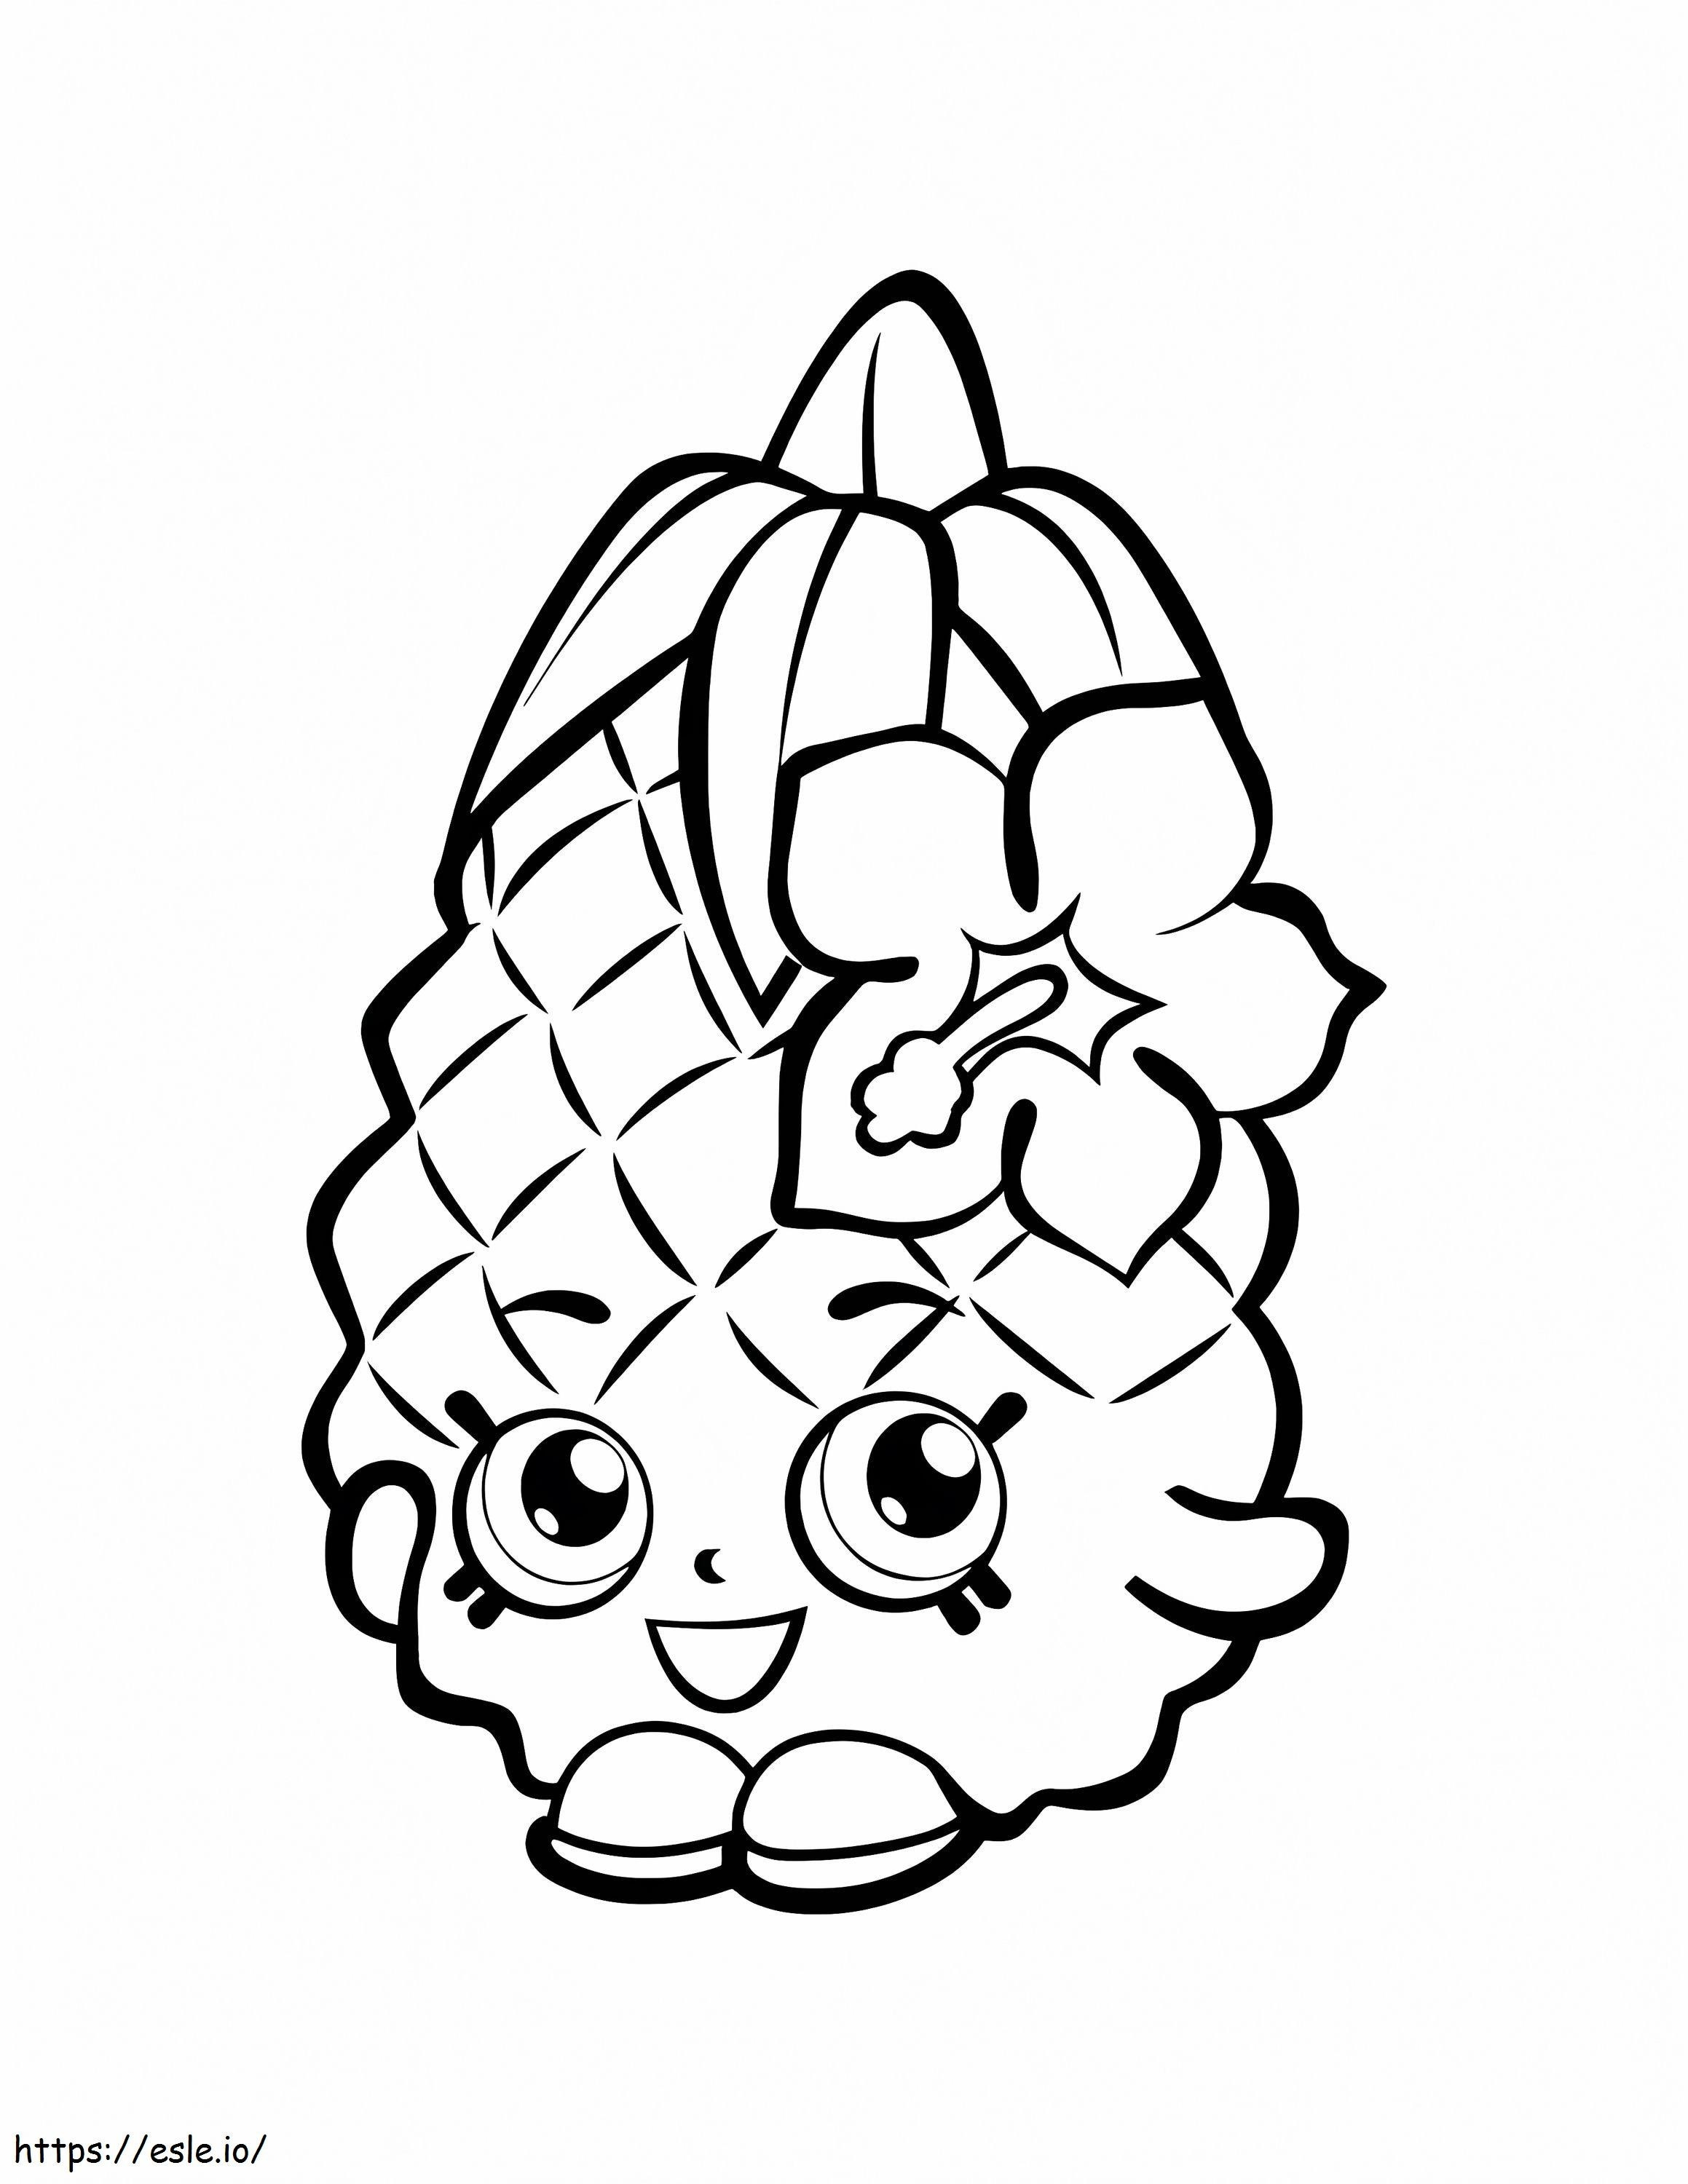 Pineapple Shopkins coloring page